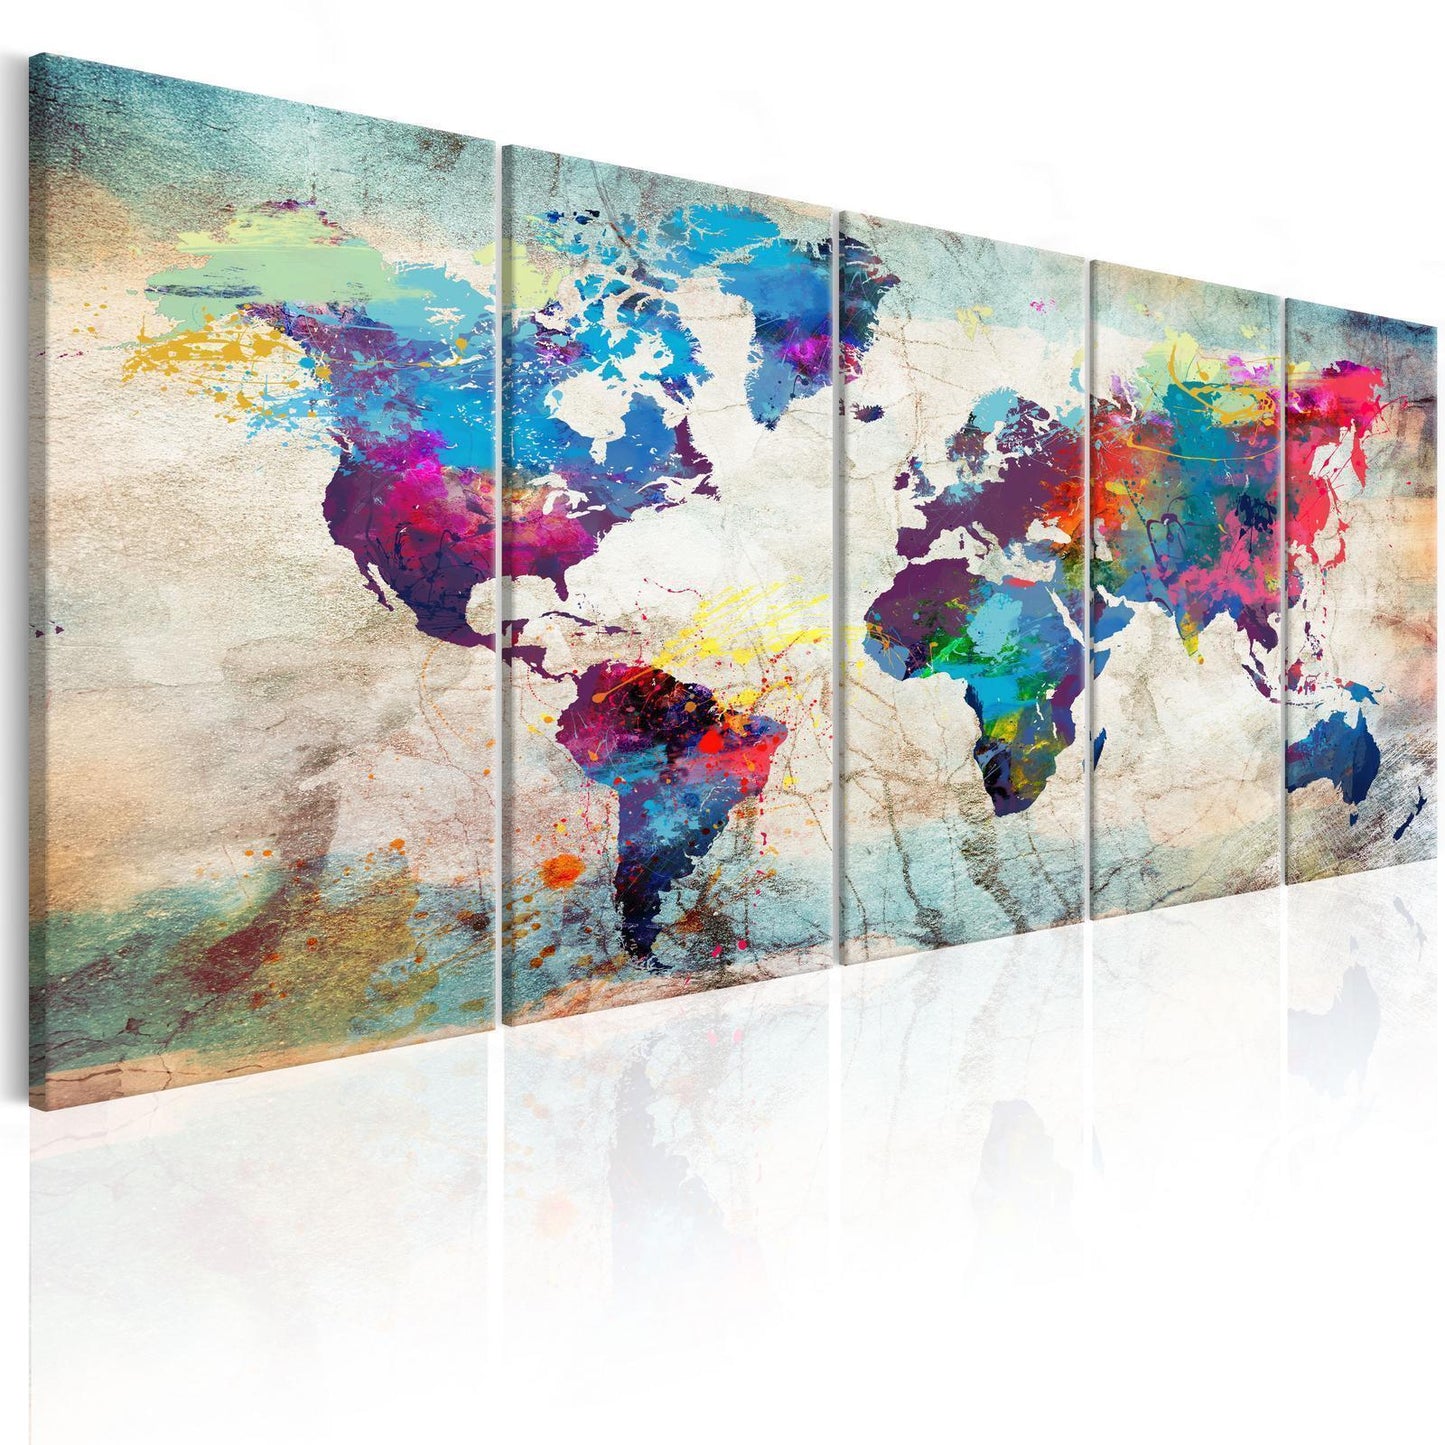 Painting - World Map: Cracked Wall